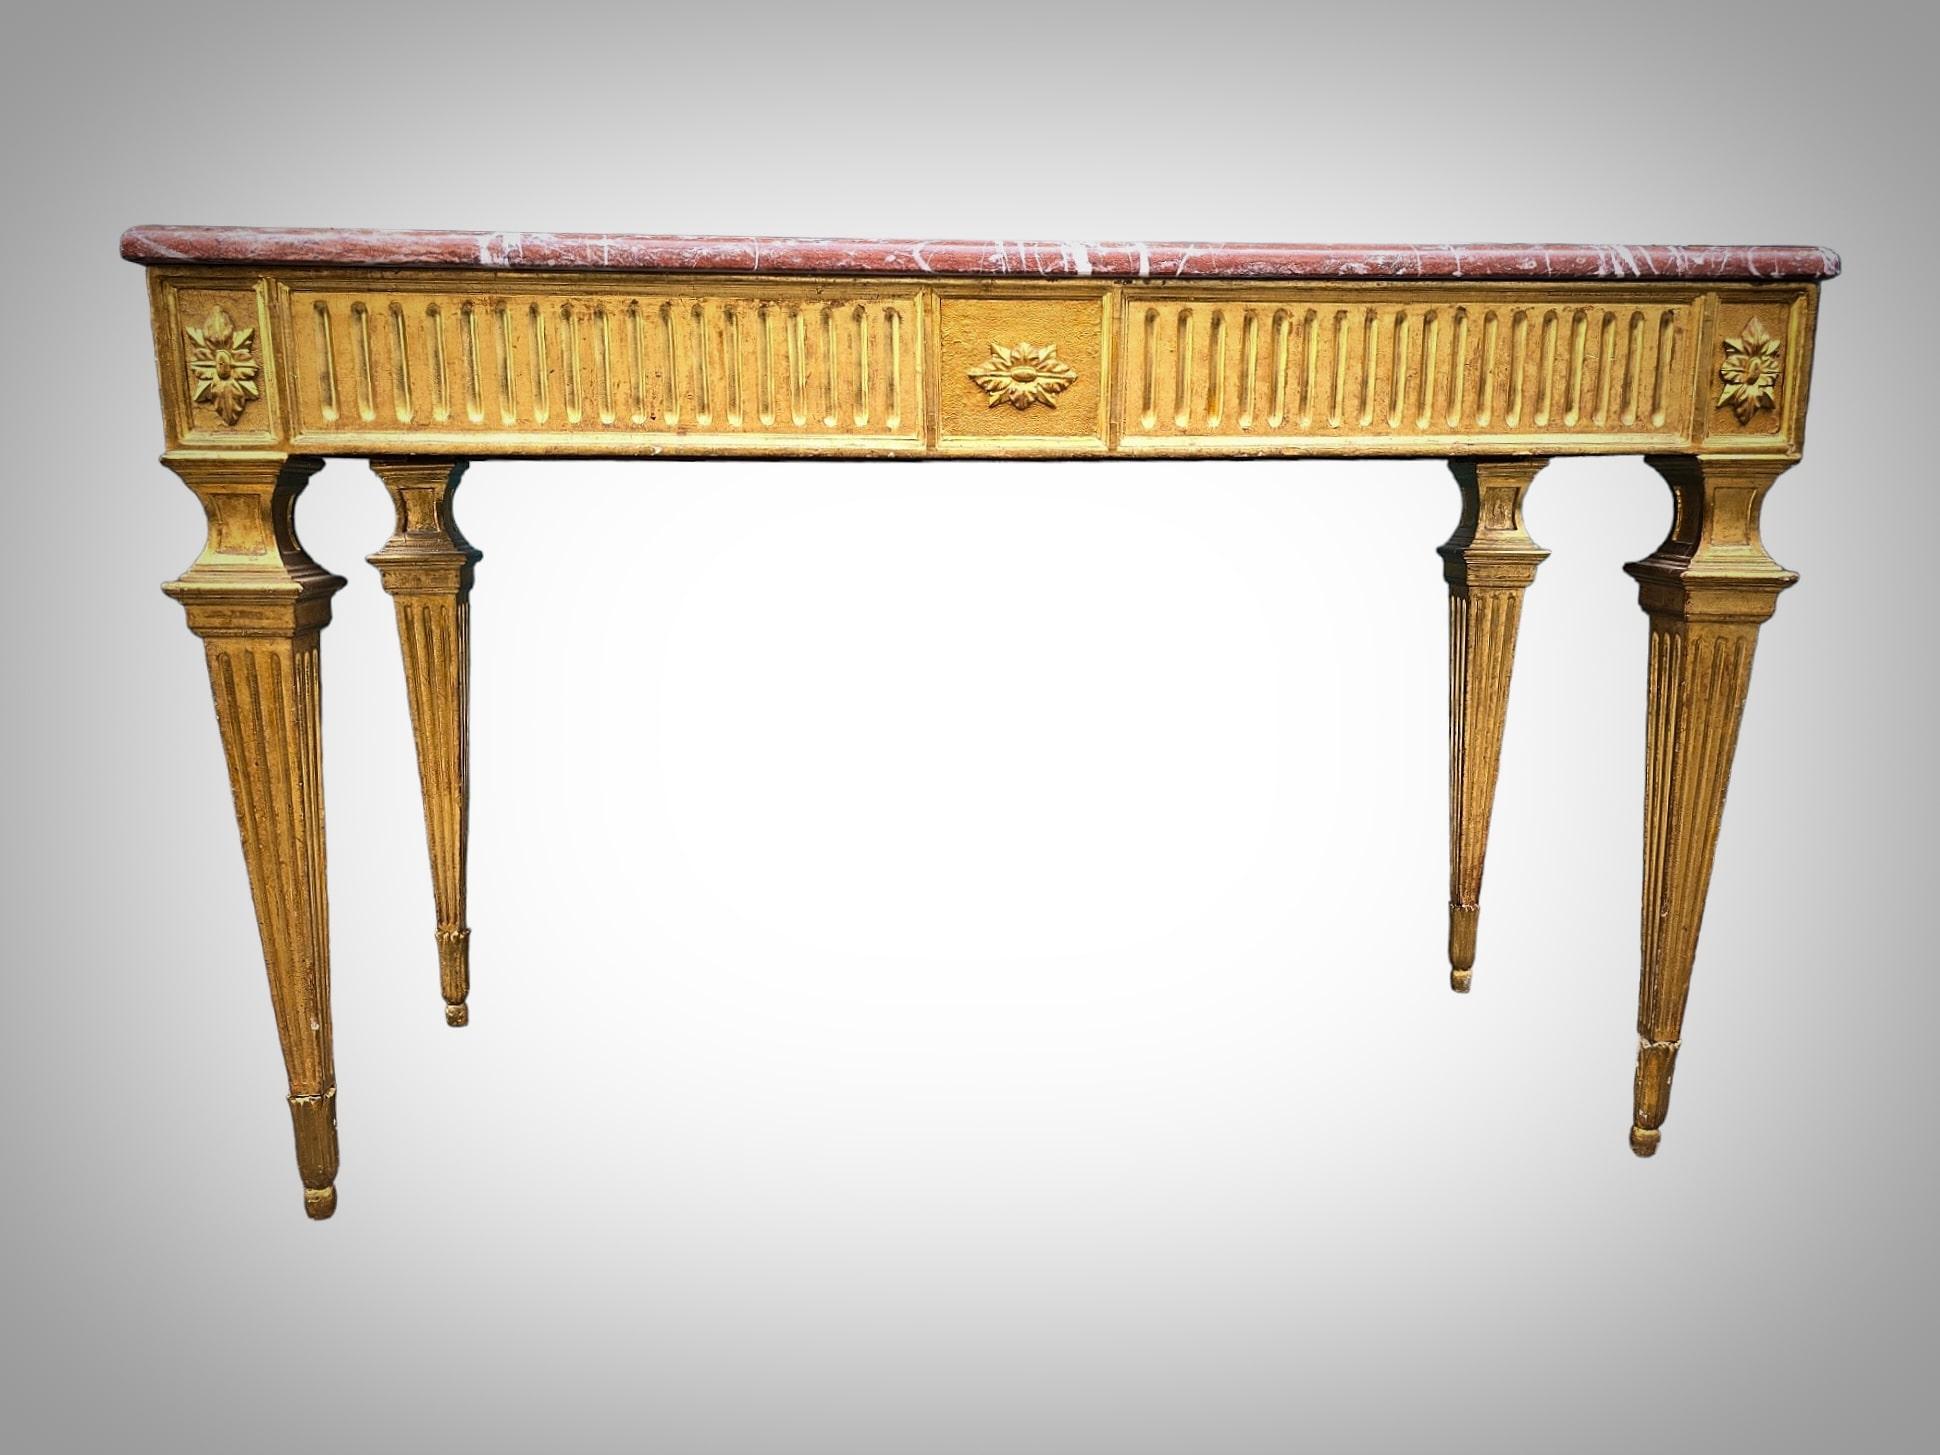 Step into the grandeur of the Louis XVI era with this magnificent console table crafted from gilded and carved wood. Dating back to the late 18th century, this exquisite piece epitomizes the elegance and sophistication of the period.

The console